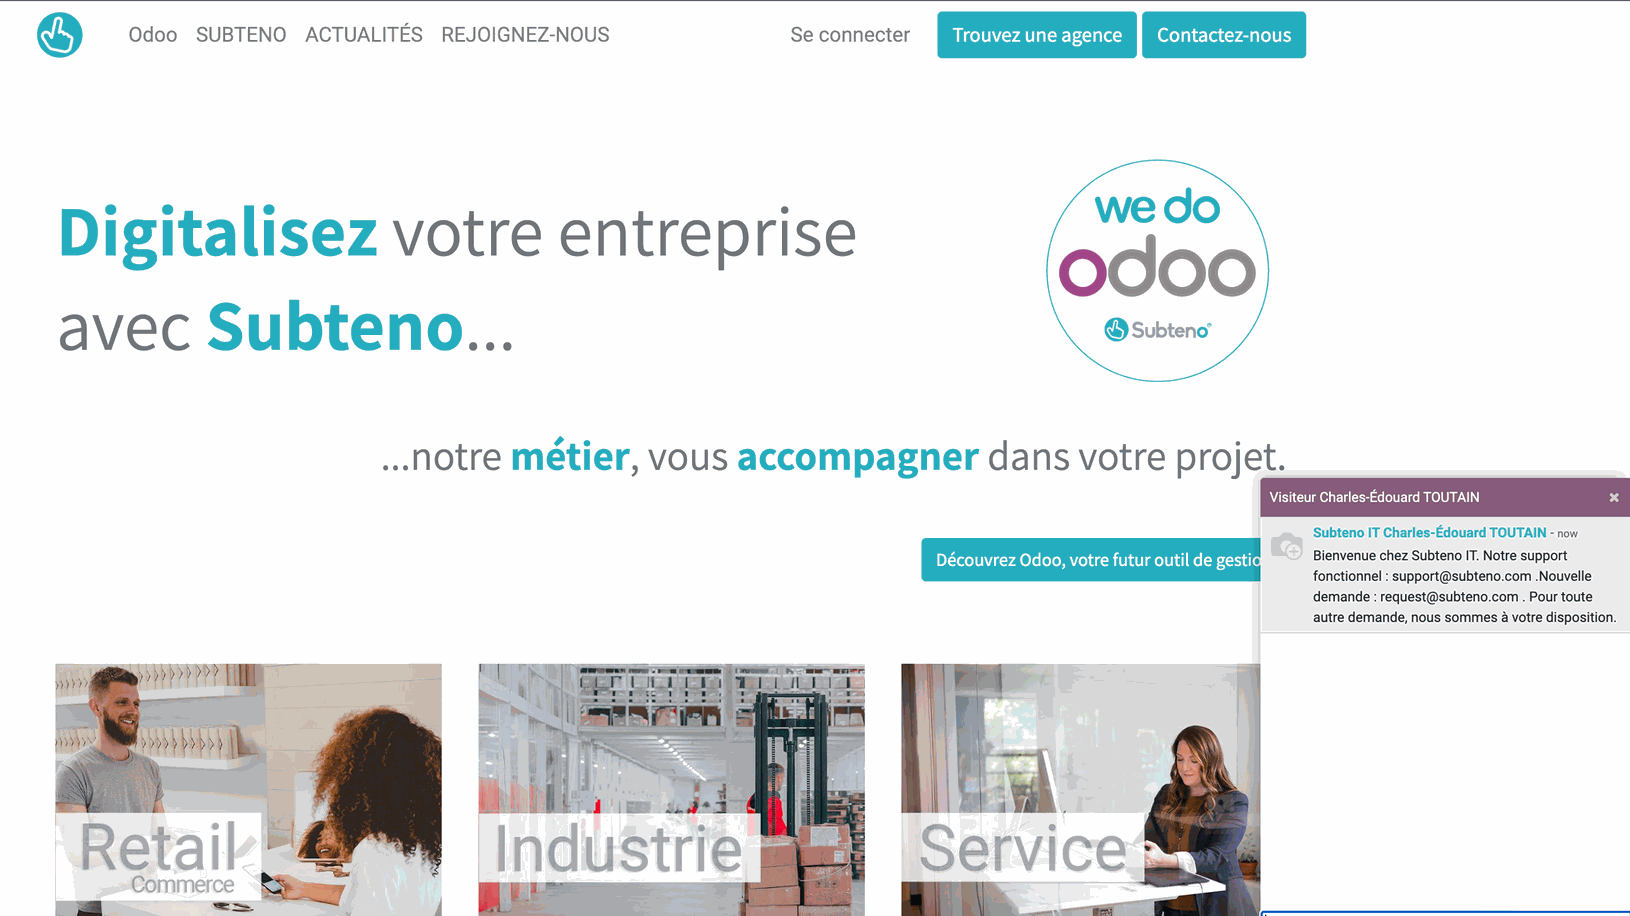 Live Chat Odoo